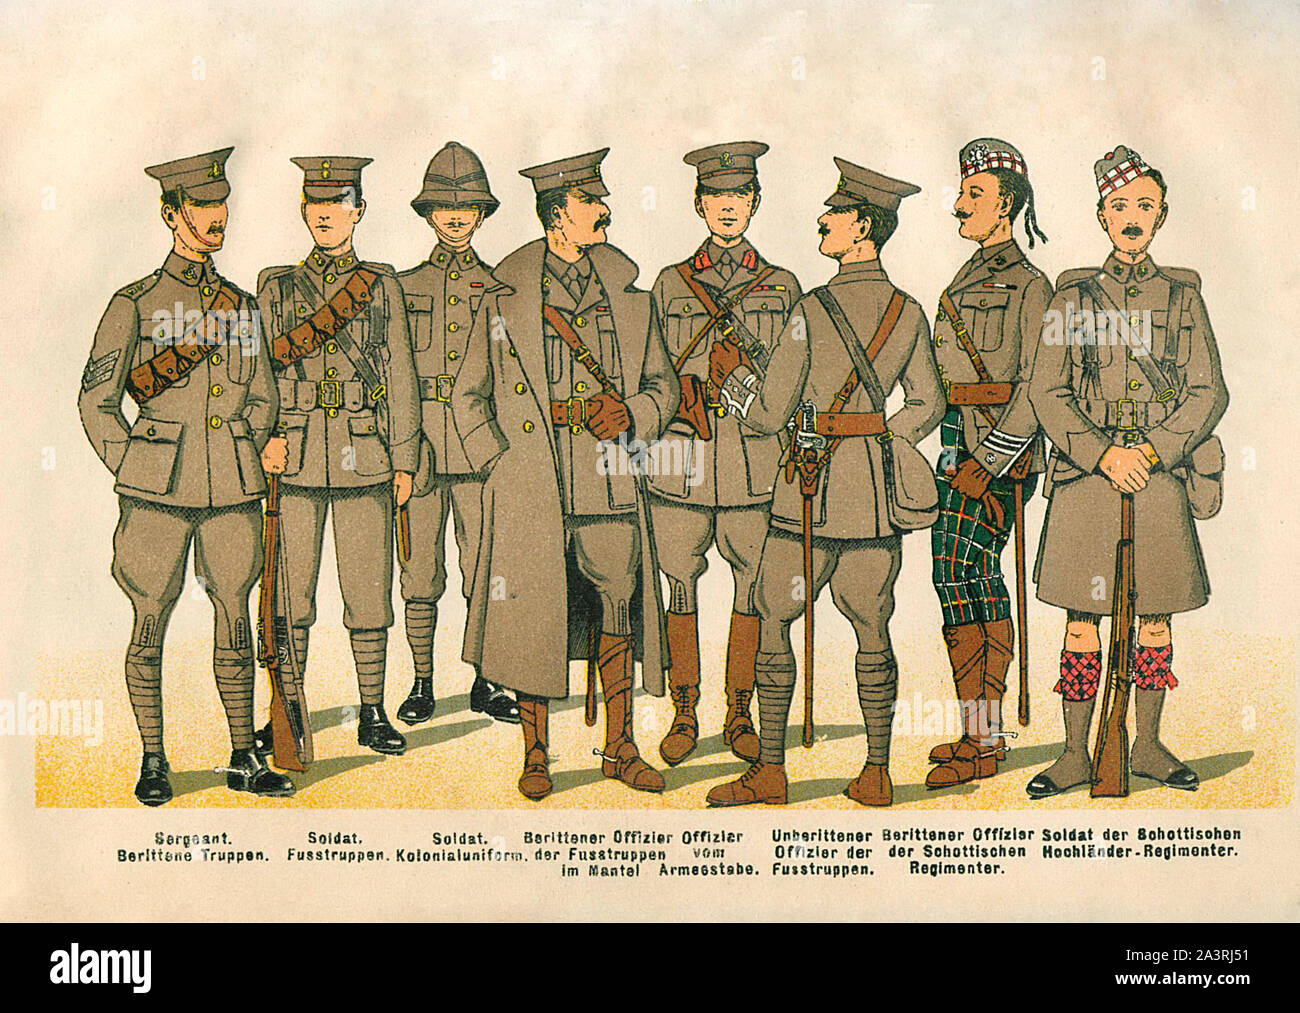 The uniforms of the English army in the field.  From left to right. 1. Sergeant. Mounted Troops. 2. Soldier. Foot troops. 3. Soldier. Colonial uniform Stock Photo